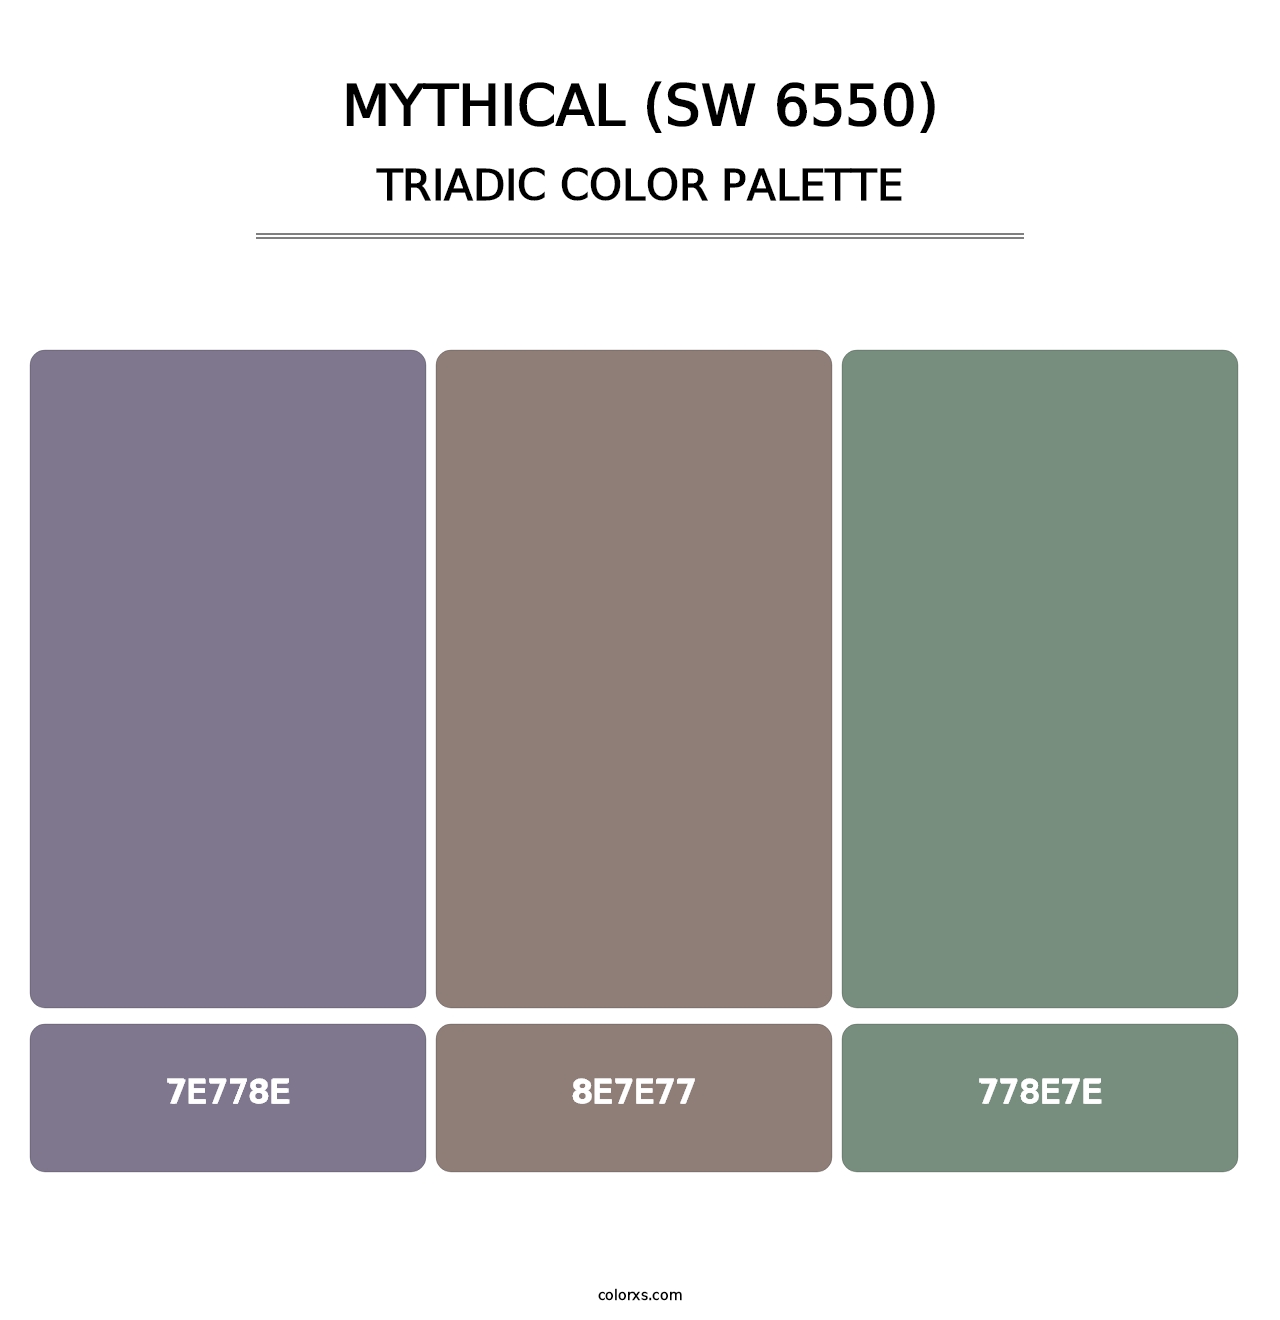 Mythical (SW 6550) - Triadic Color Palette